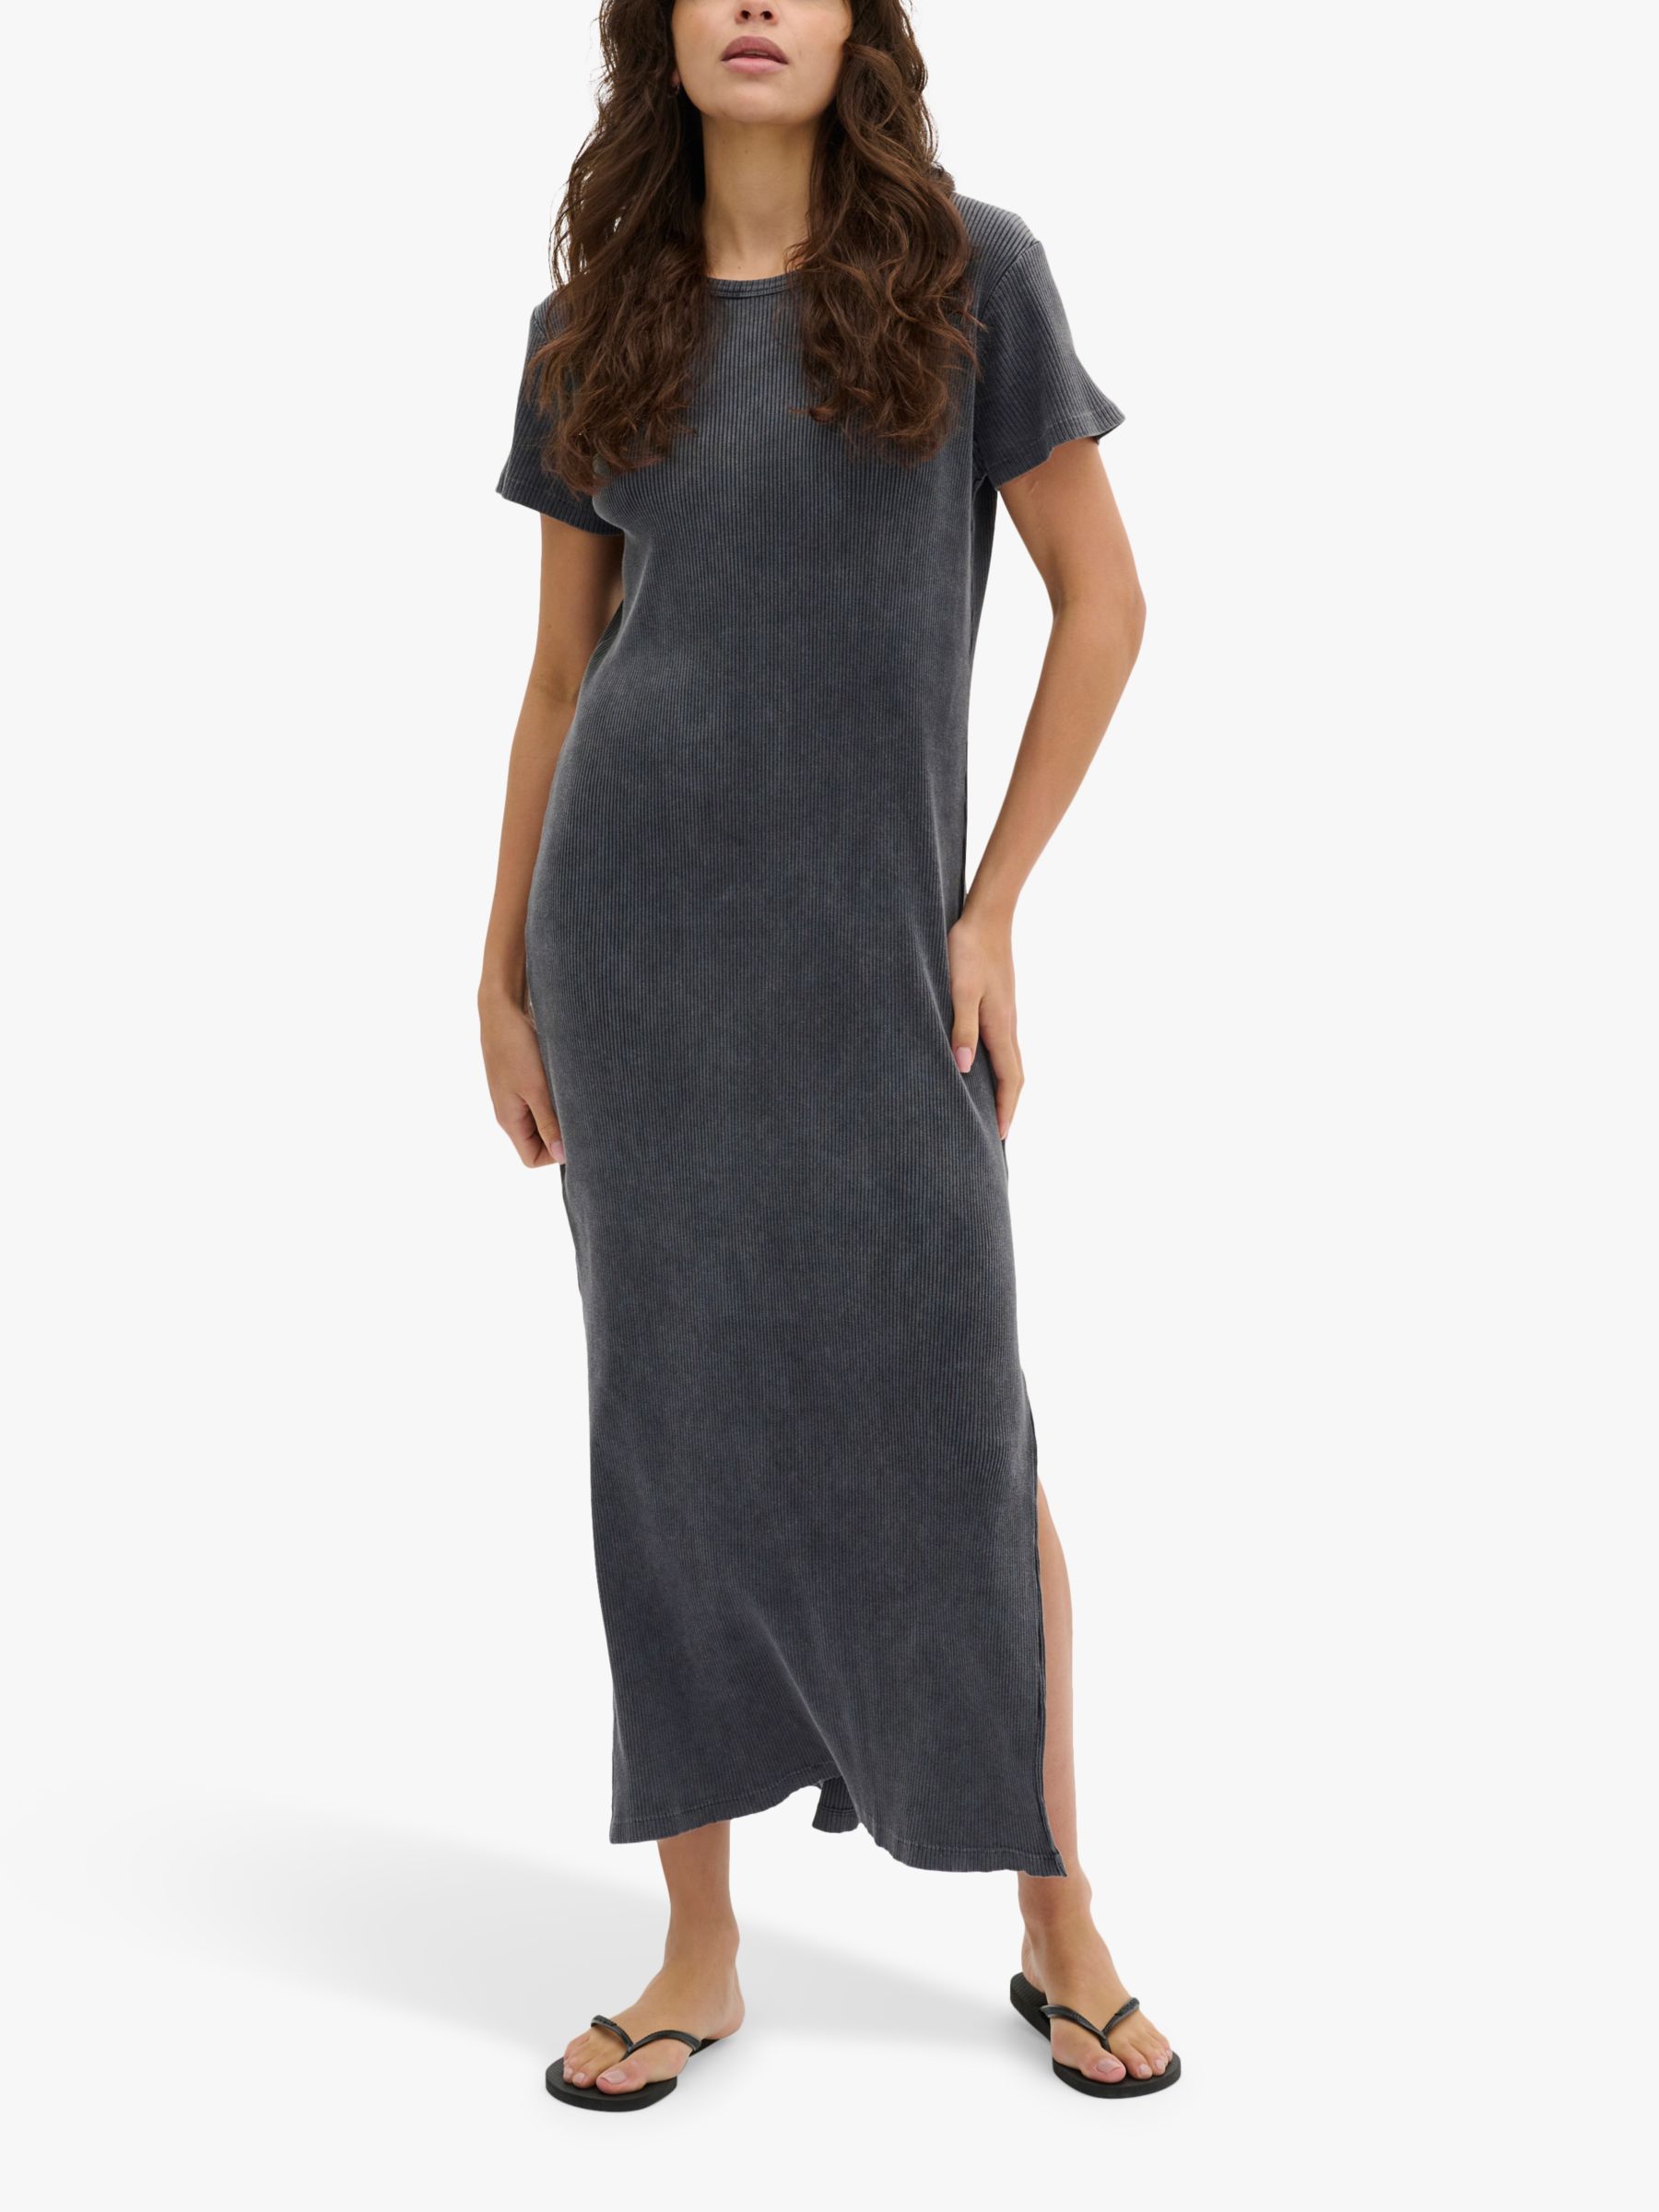 MY ESSENTIAL WARDROBE Ace Ribbed Jersey T-Shirt Maxi Dress, Washed Black, XS